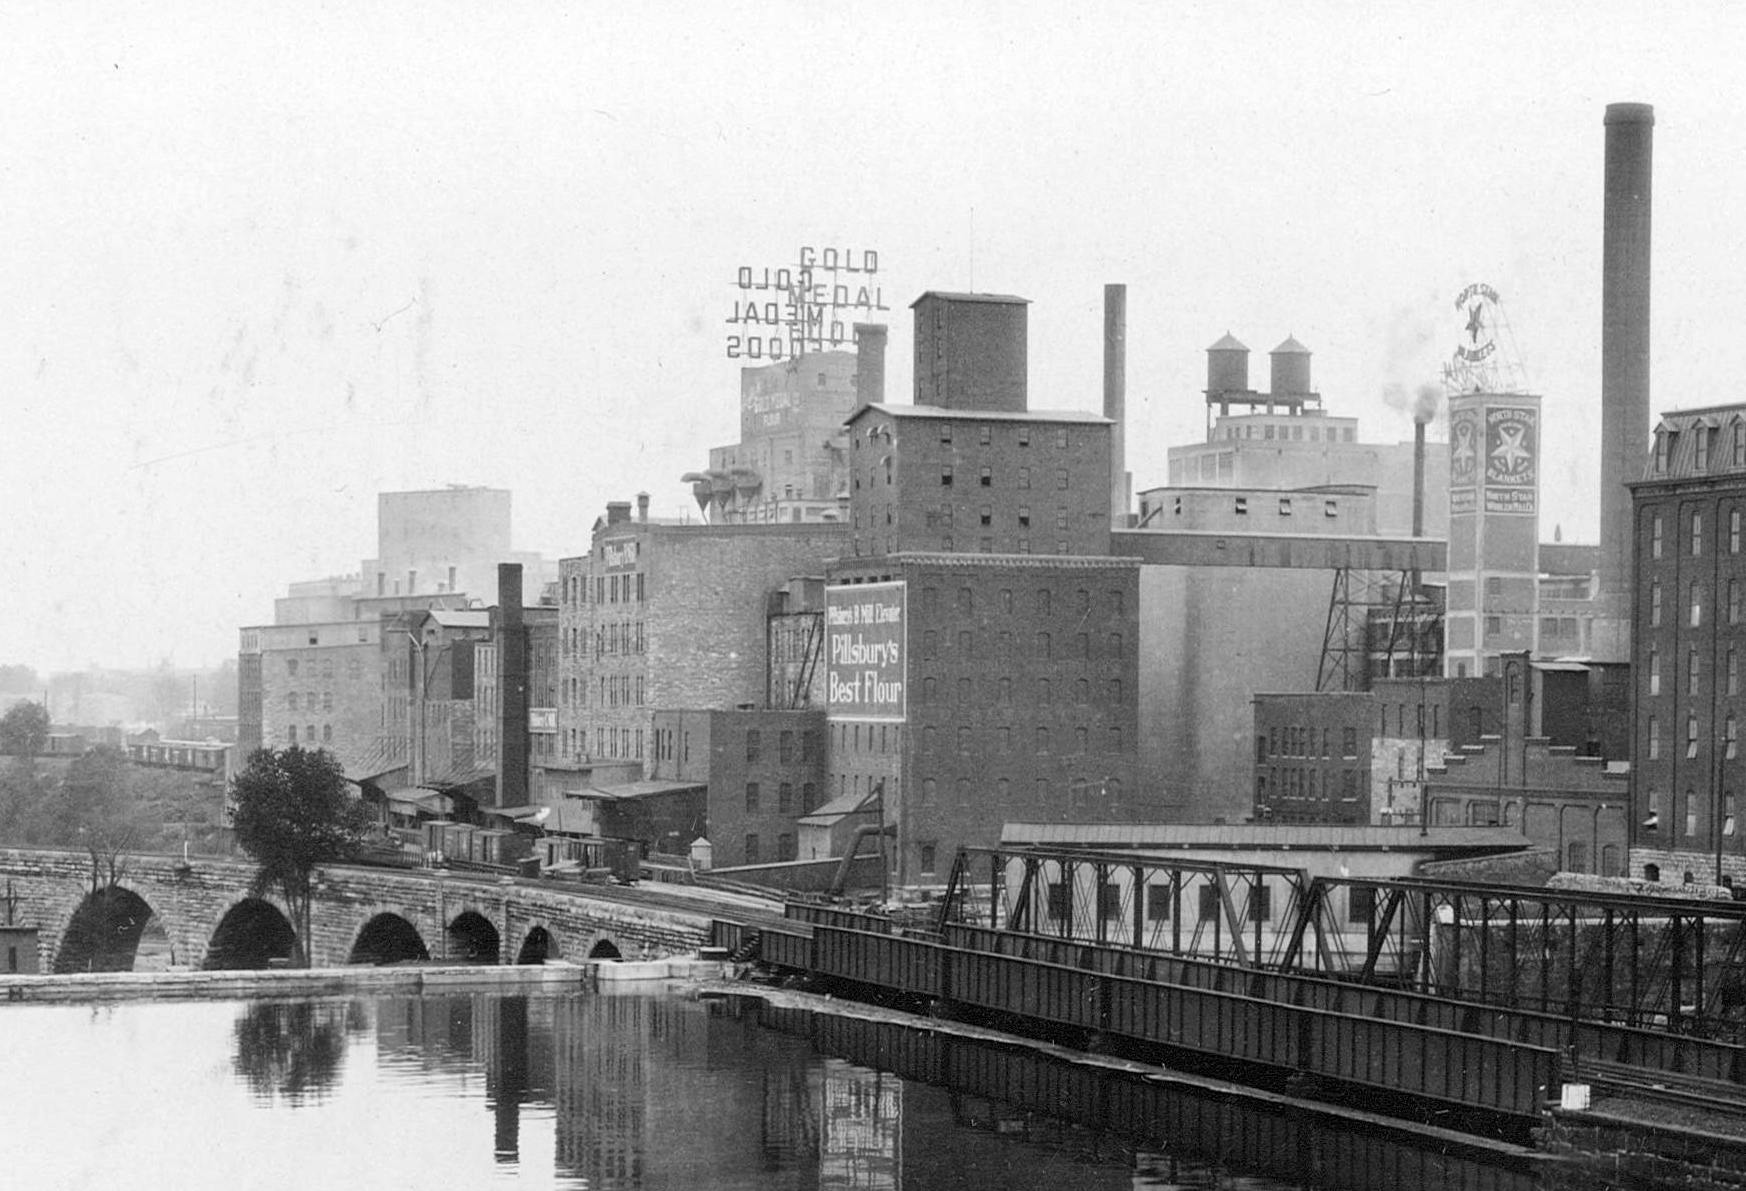 The Mill District in 1930, the year Buffalo overtook Minneapolis as the country's leading flour producer.